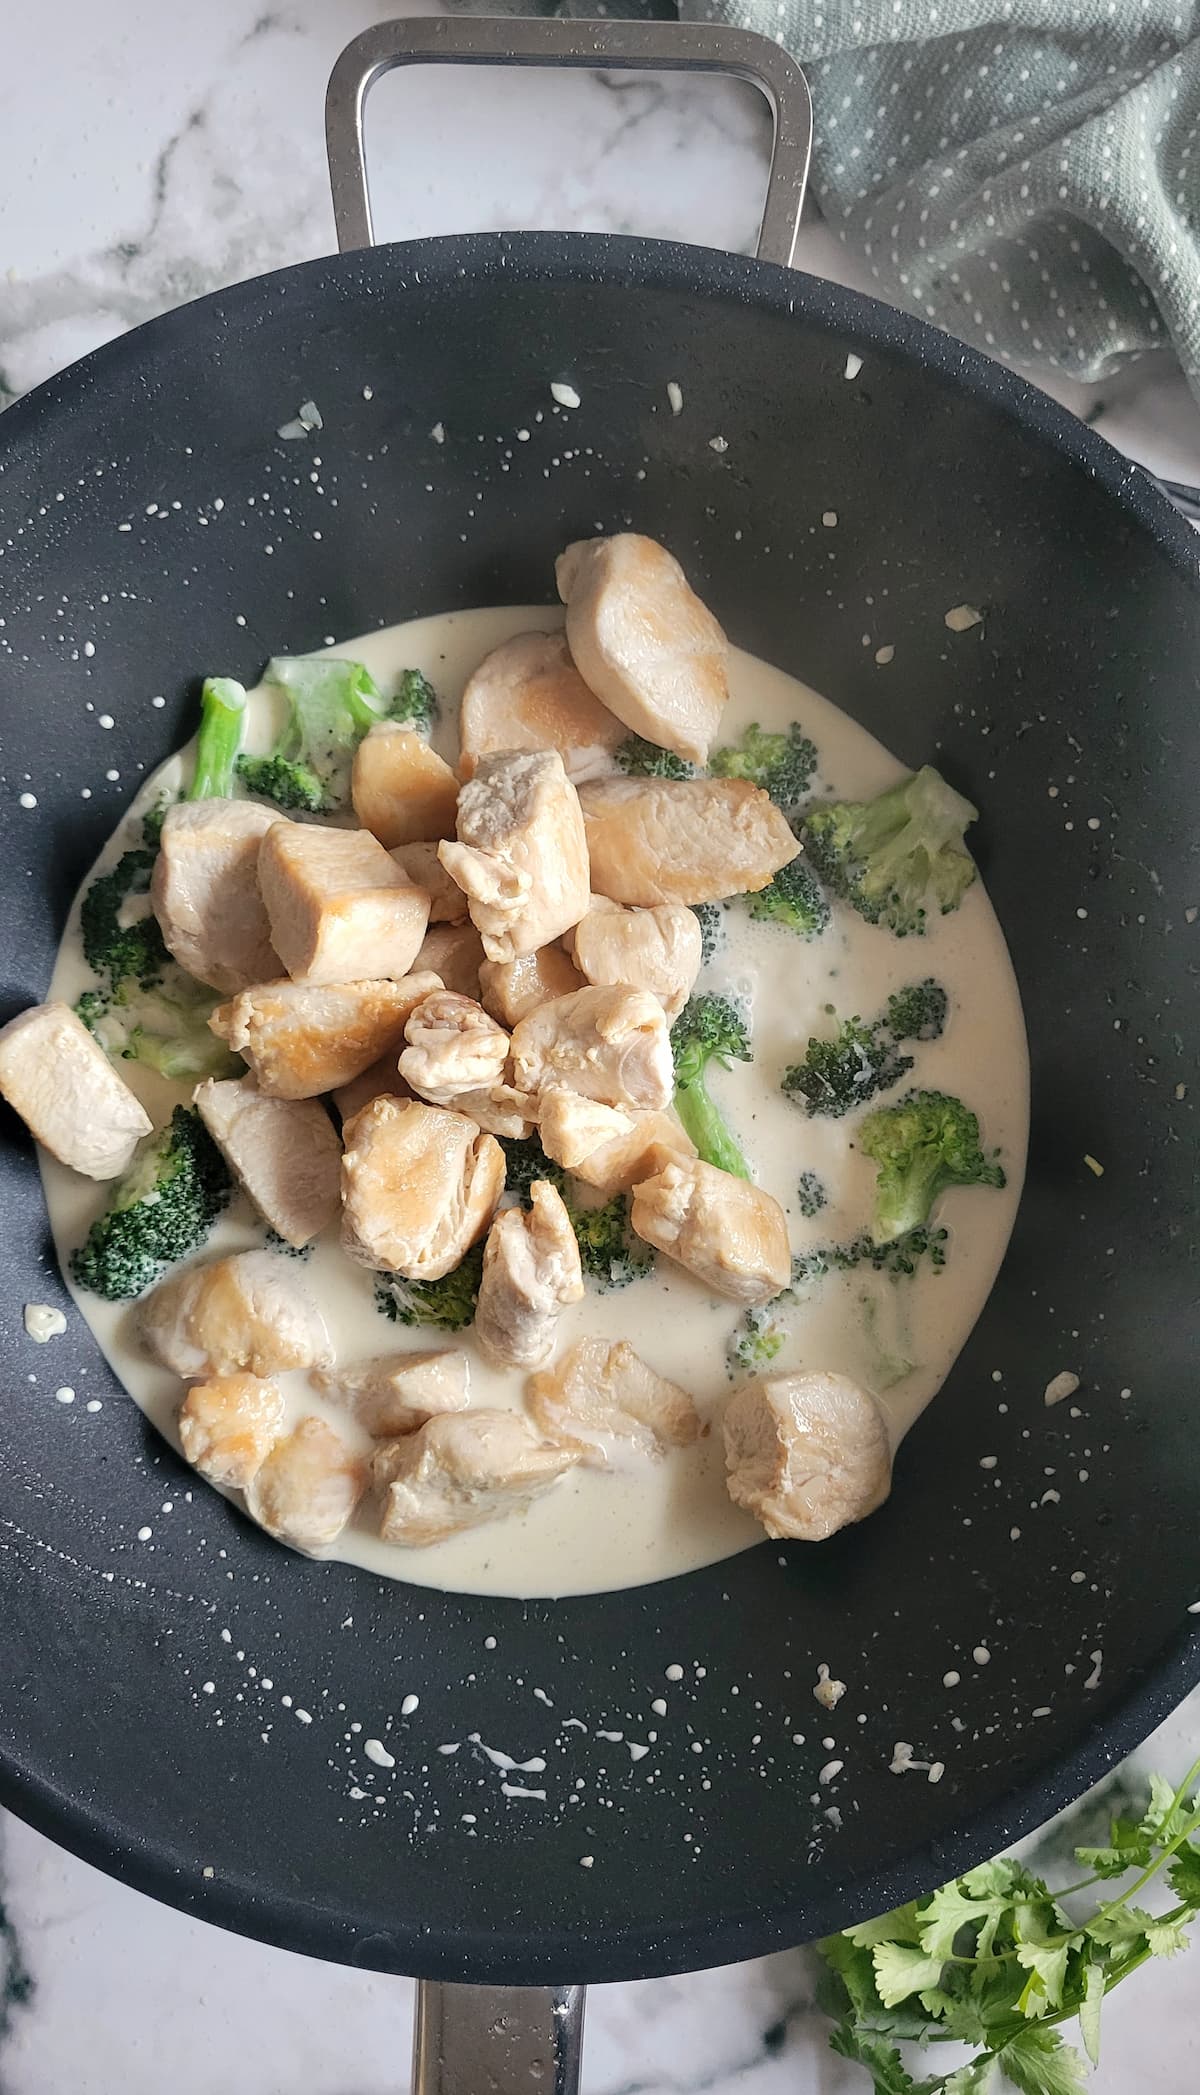 cubed chicken and broccoli florets in a creamy sauce in a wok